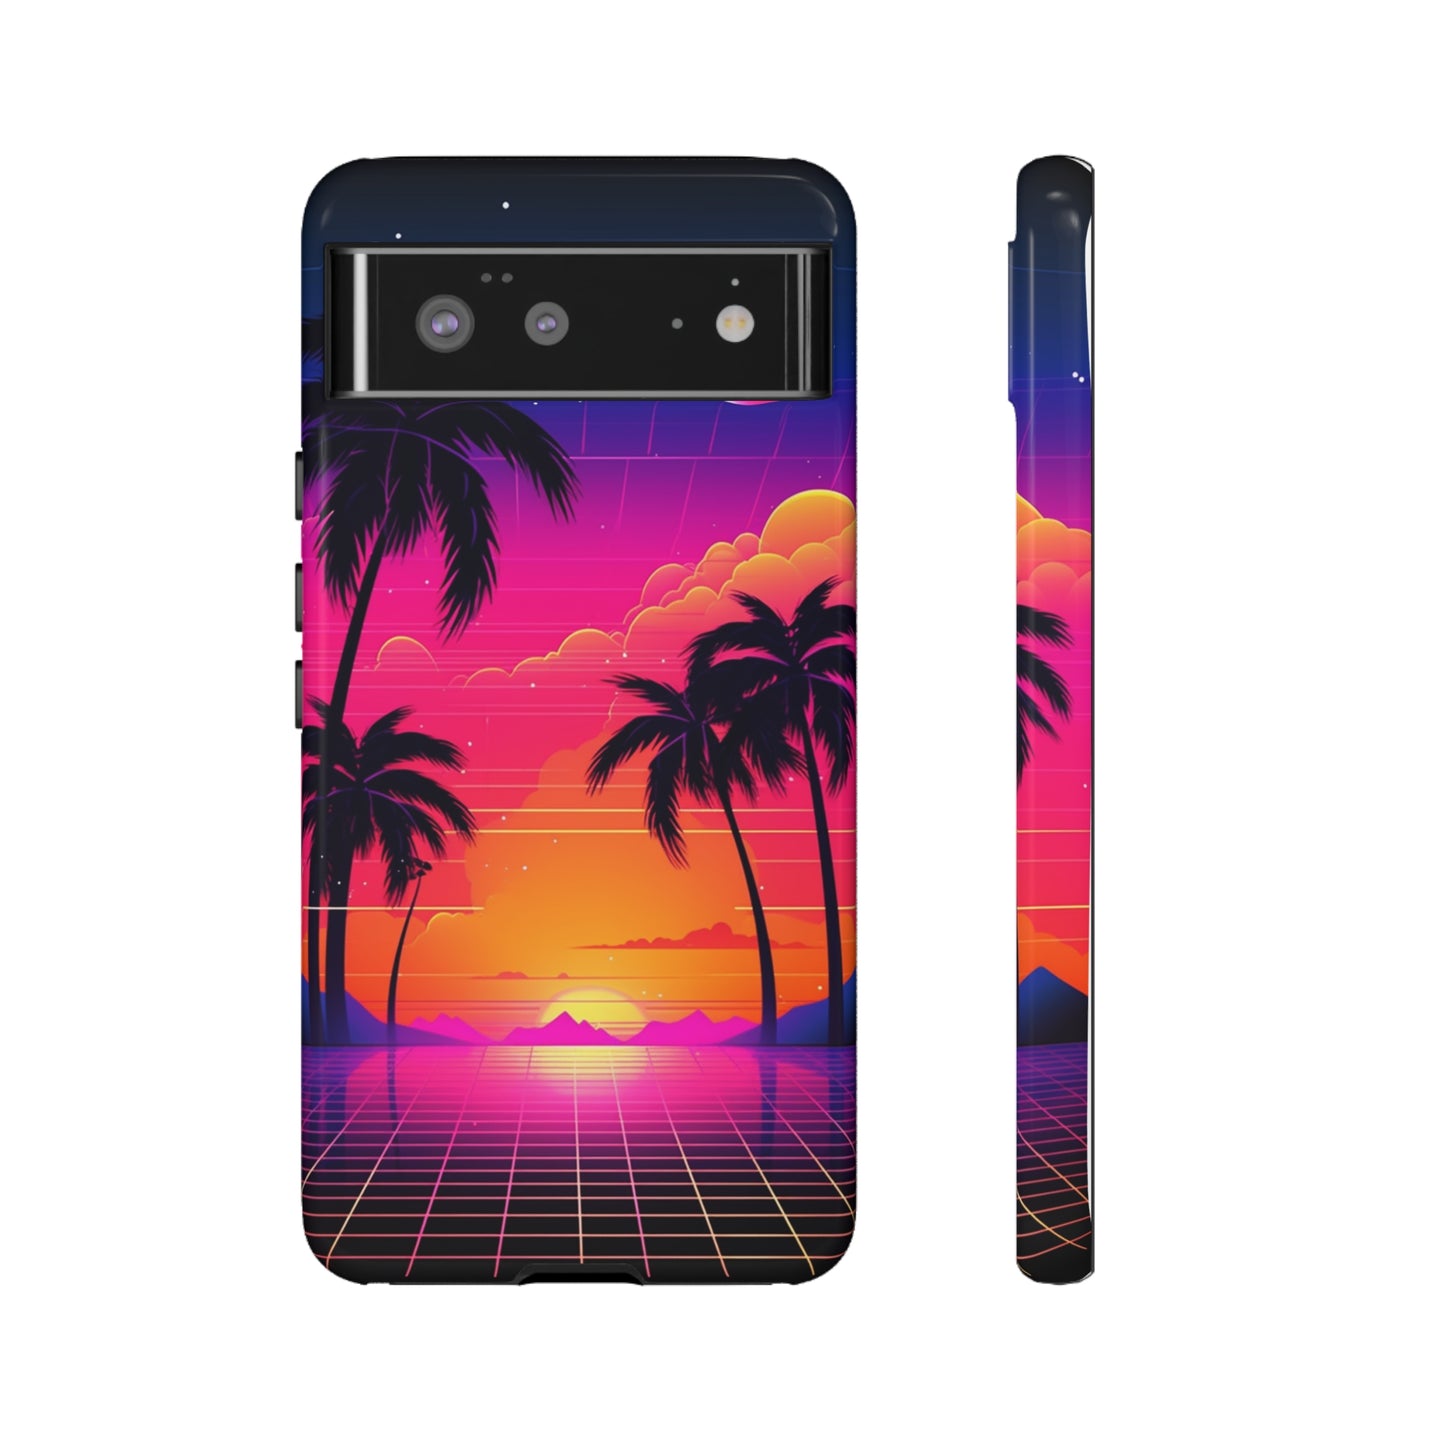 Synthwave Retro Style Phone Case | Nostalgic Vibes for iPhone 12, 13, 14, X, Google Pixel, and Samsung Galaxy